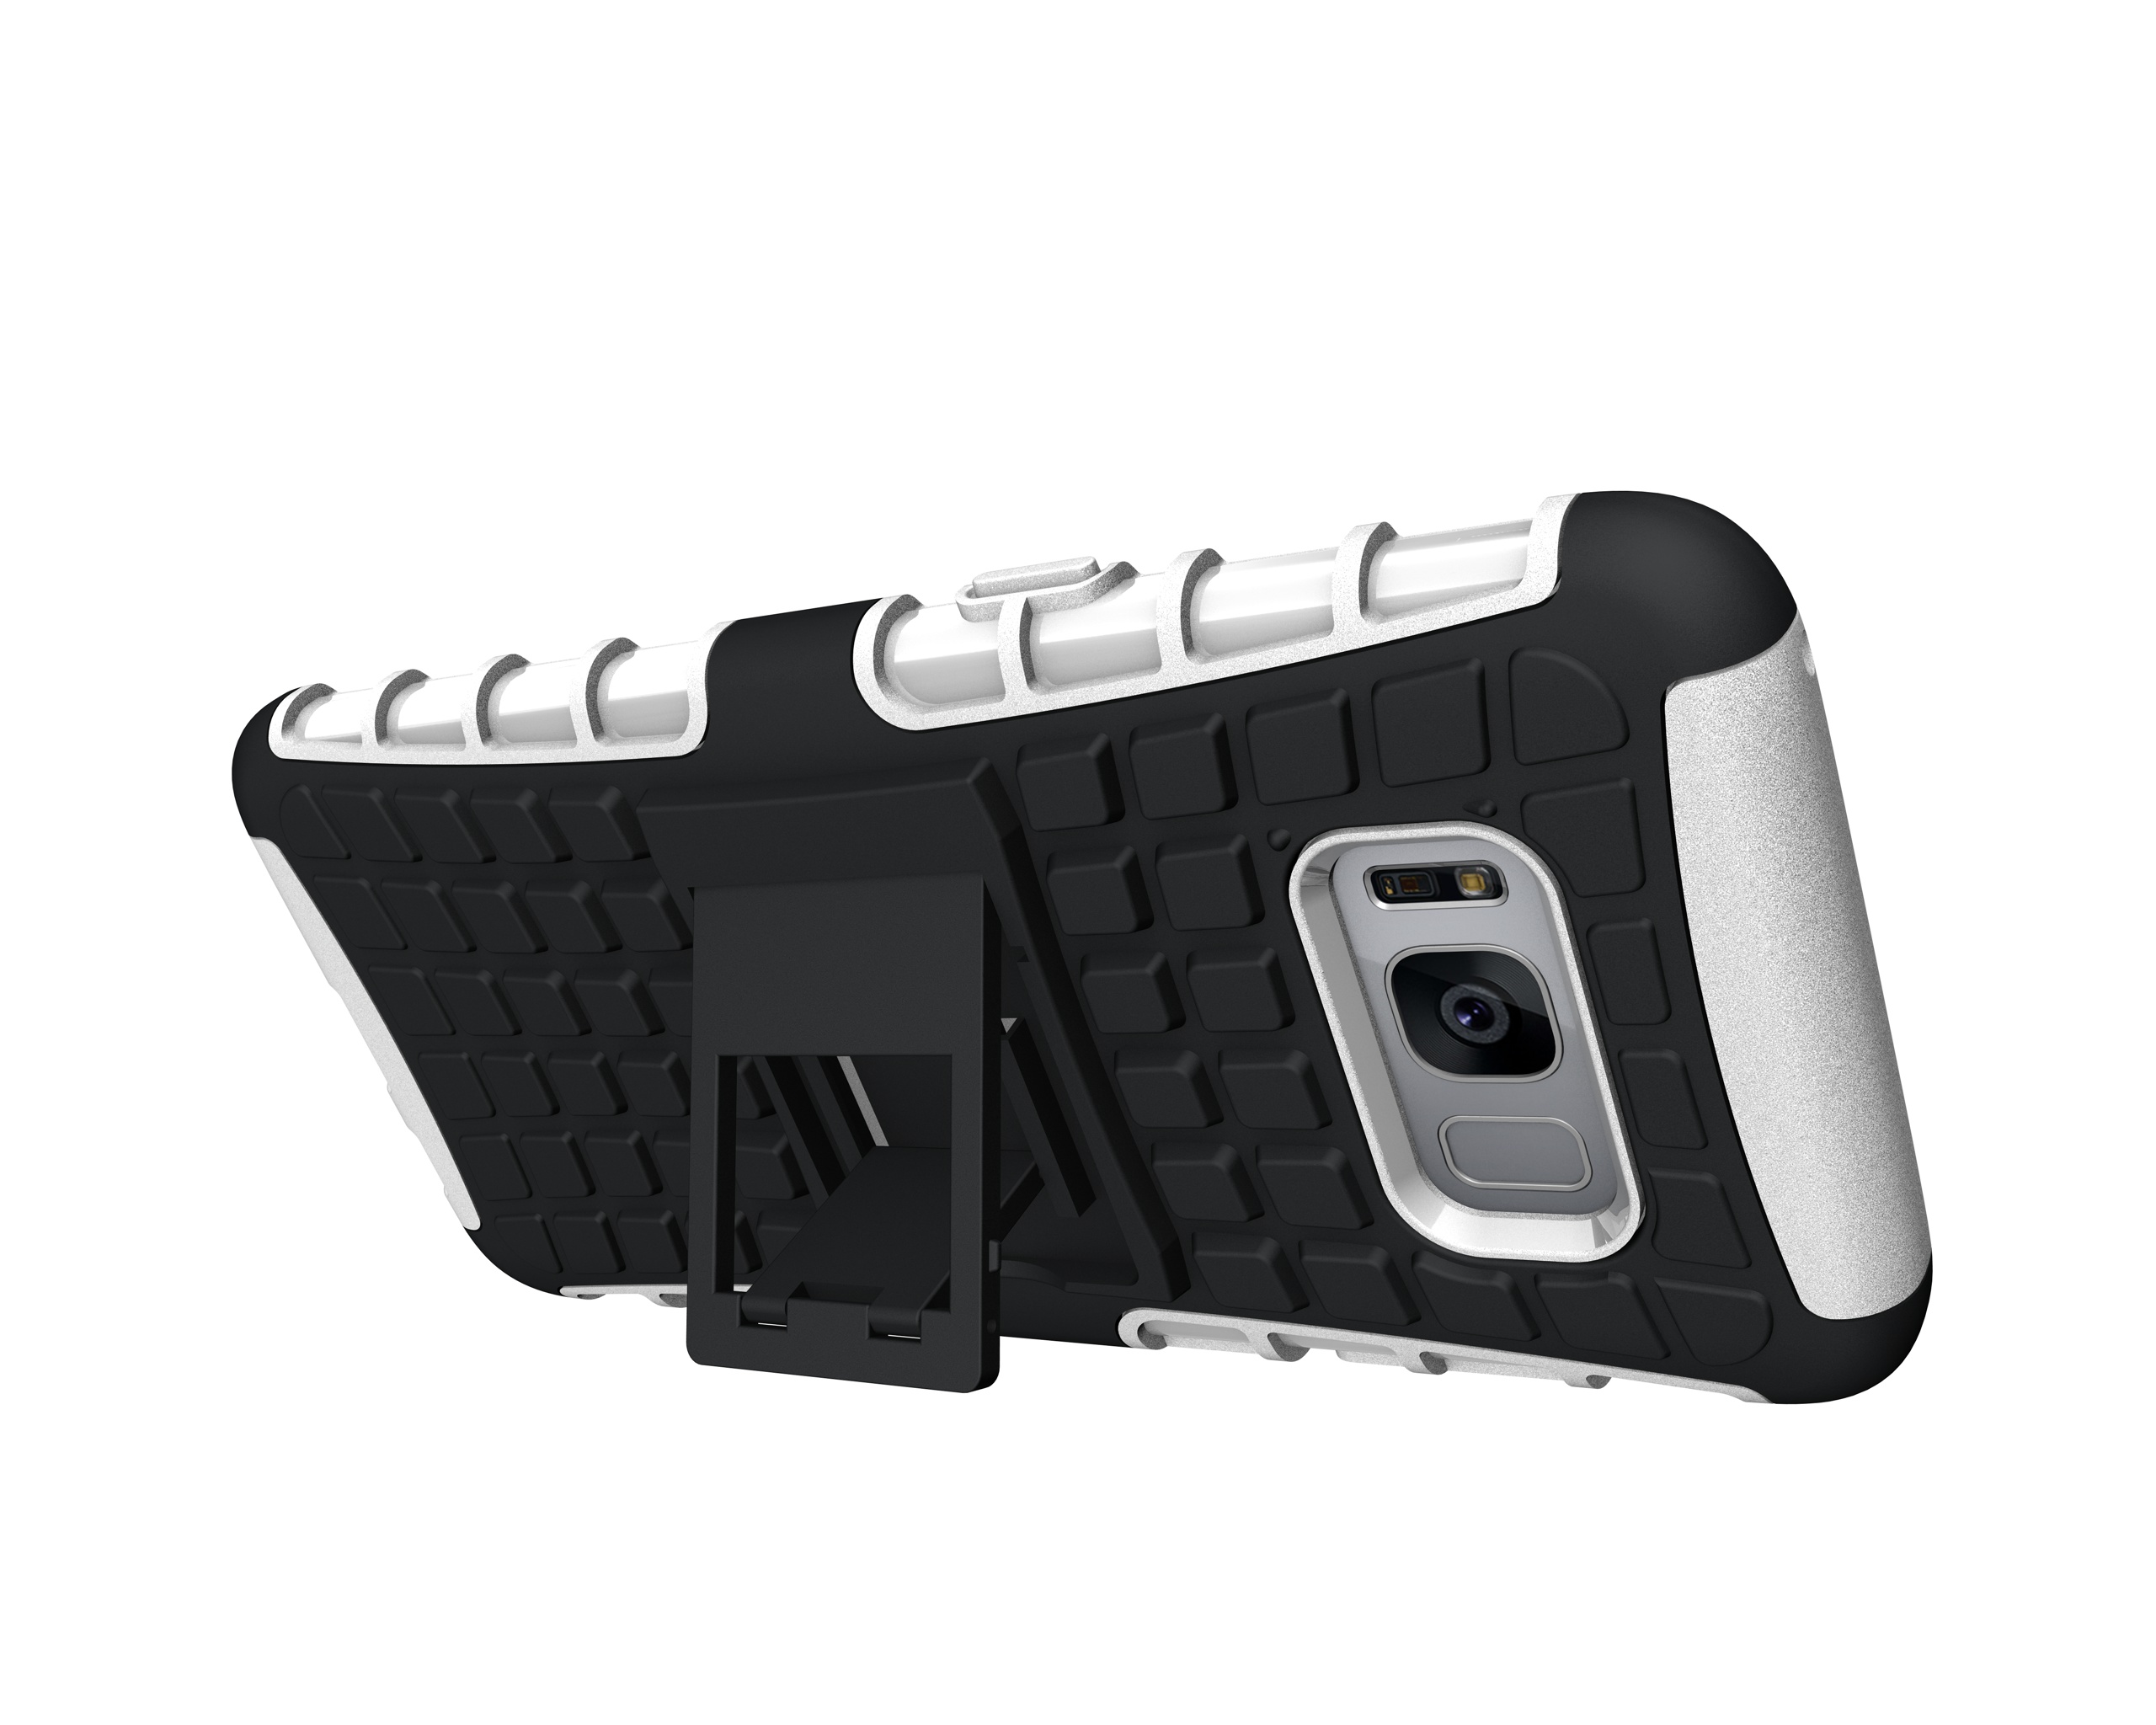 Bakeeytrade-2-in-1-Armor-Kickstand-TPU-PC-Case-for-Samsung-Galaxy-S8-Plus-1238929-4